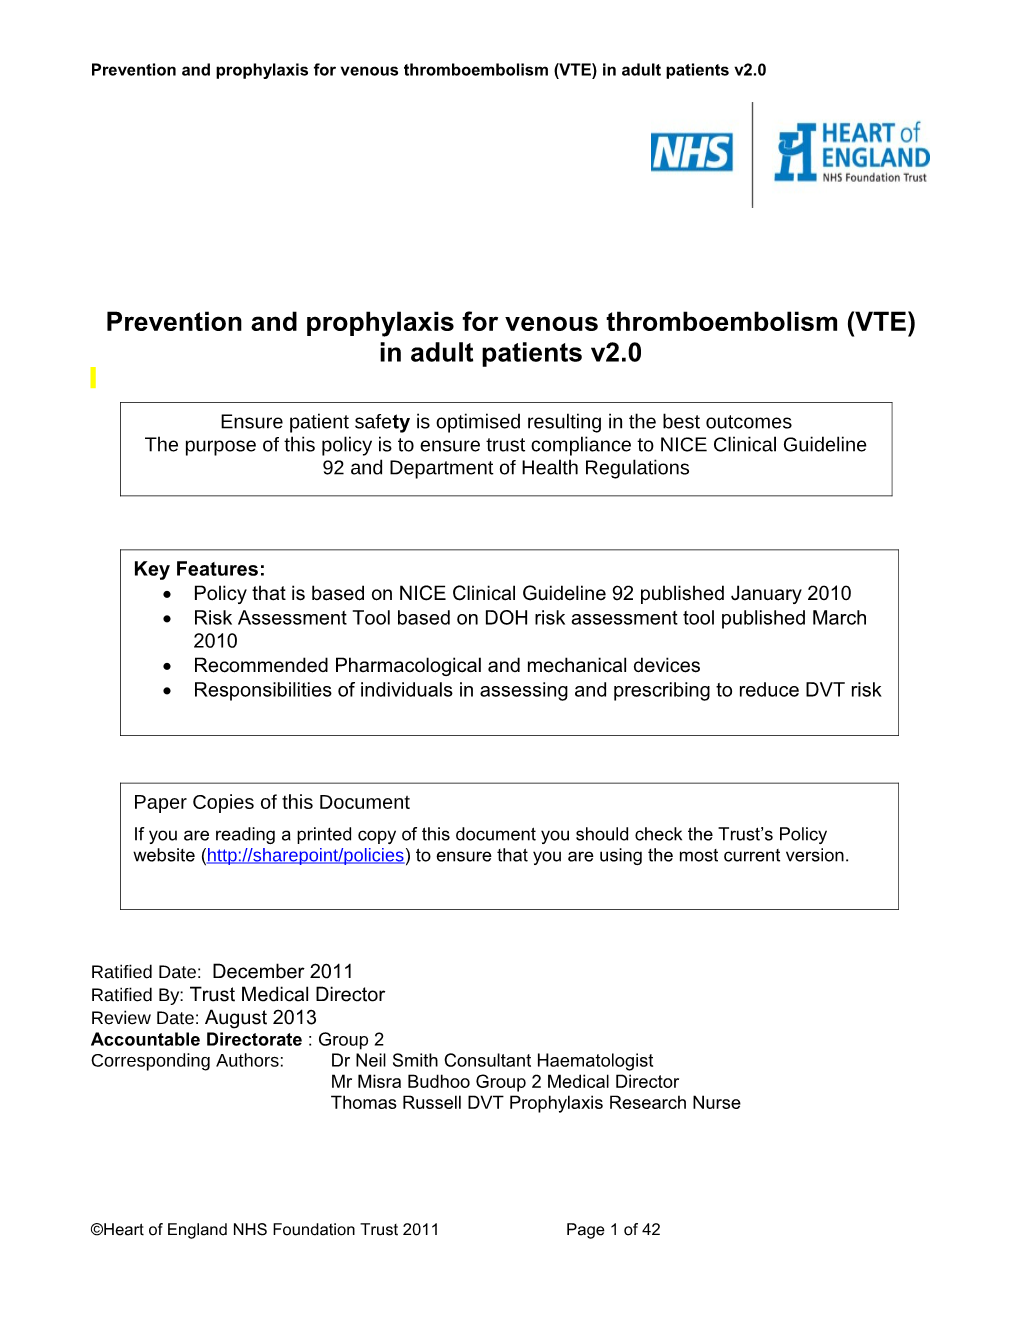 Prevention and Prophylaxis for Venous Thromboembolism in Adult Patients V1